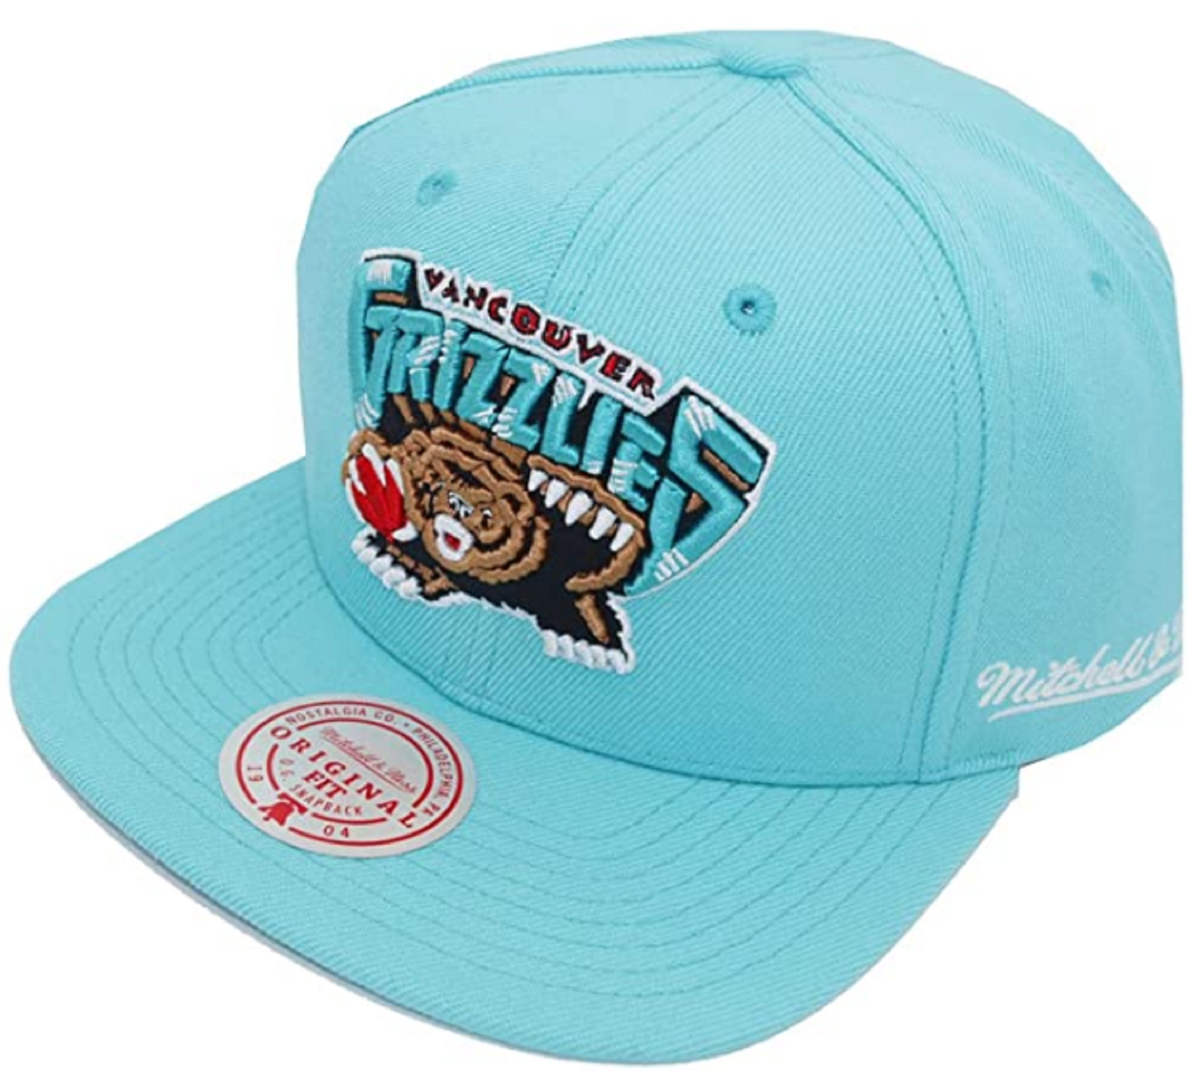 Men's Vancouver Grizzlies Mitchell & Ness NBA Teal Wool Snapback